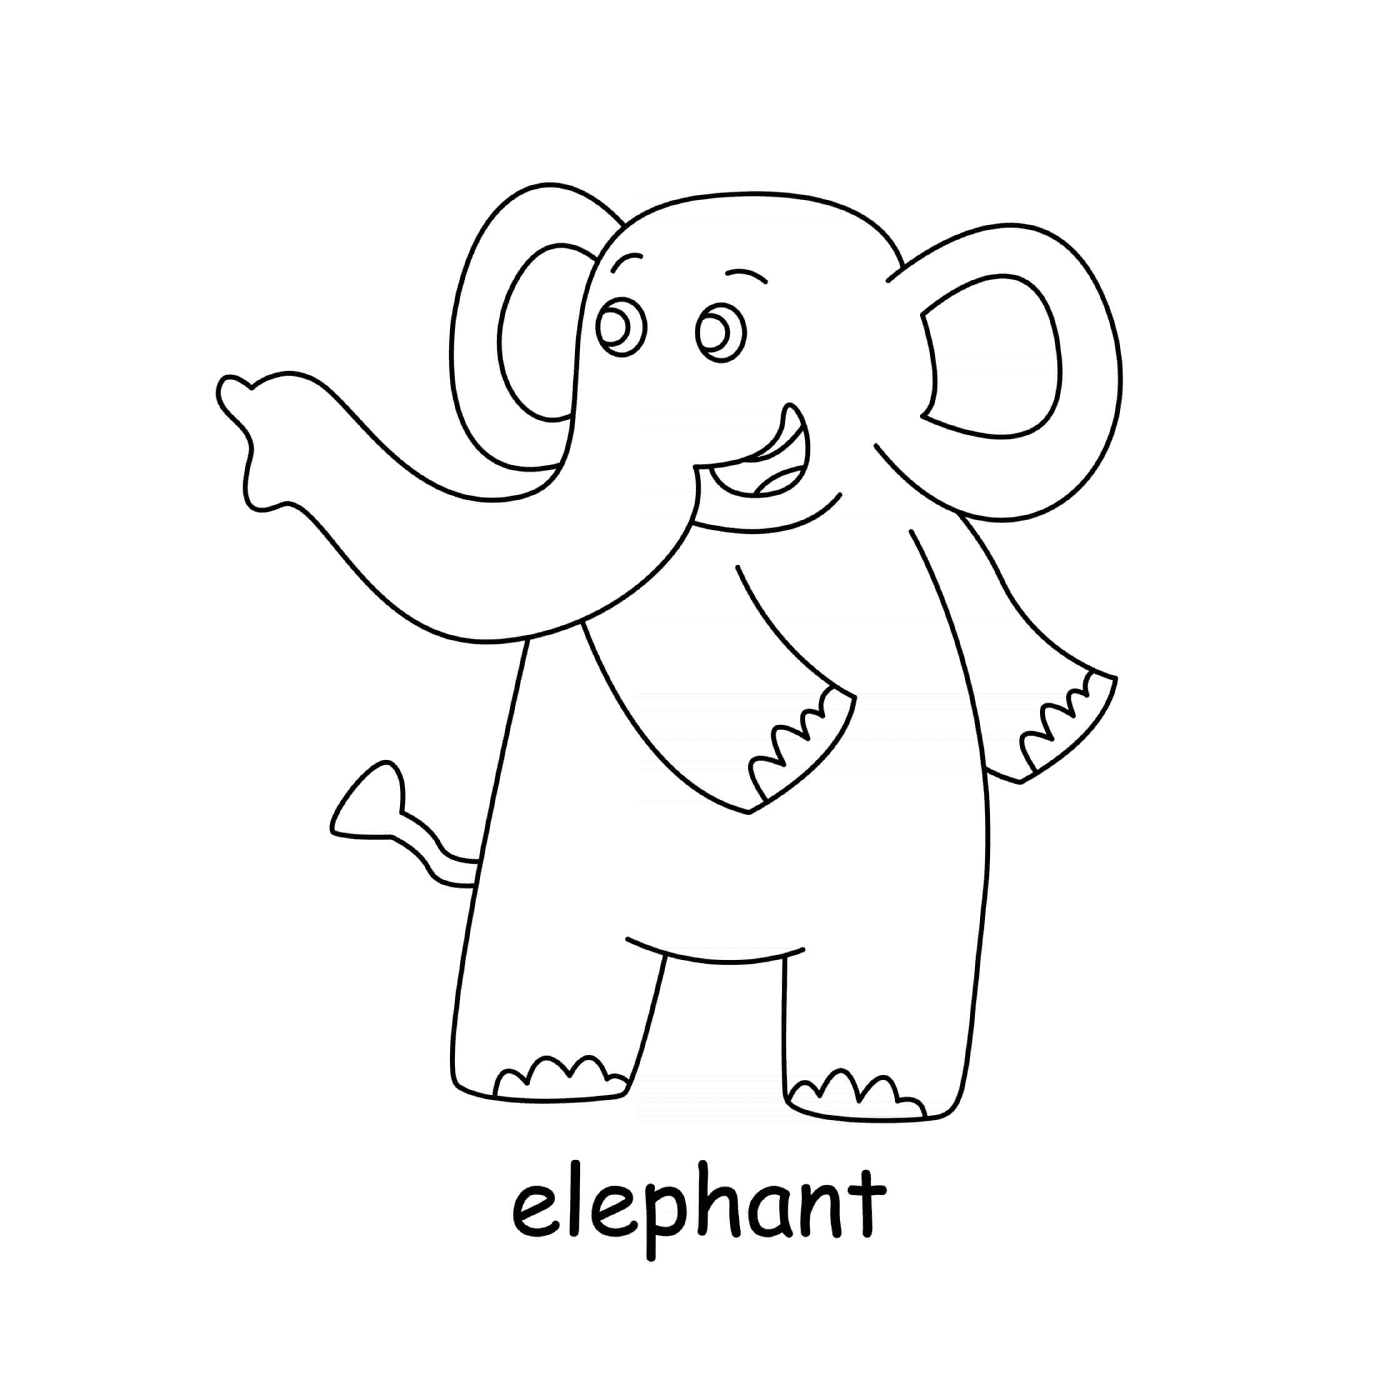  elephant pointing to the left 